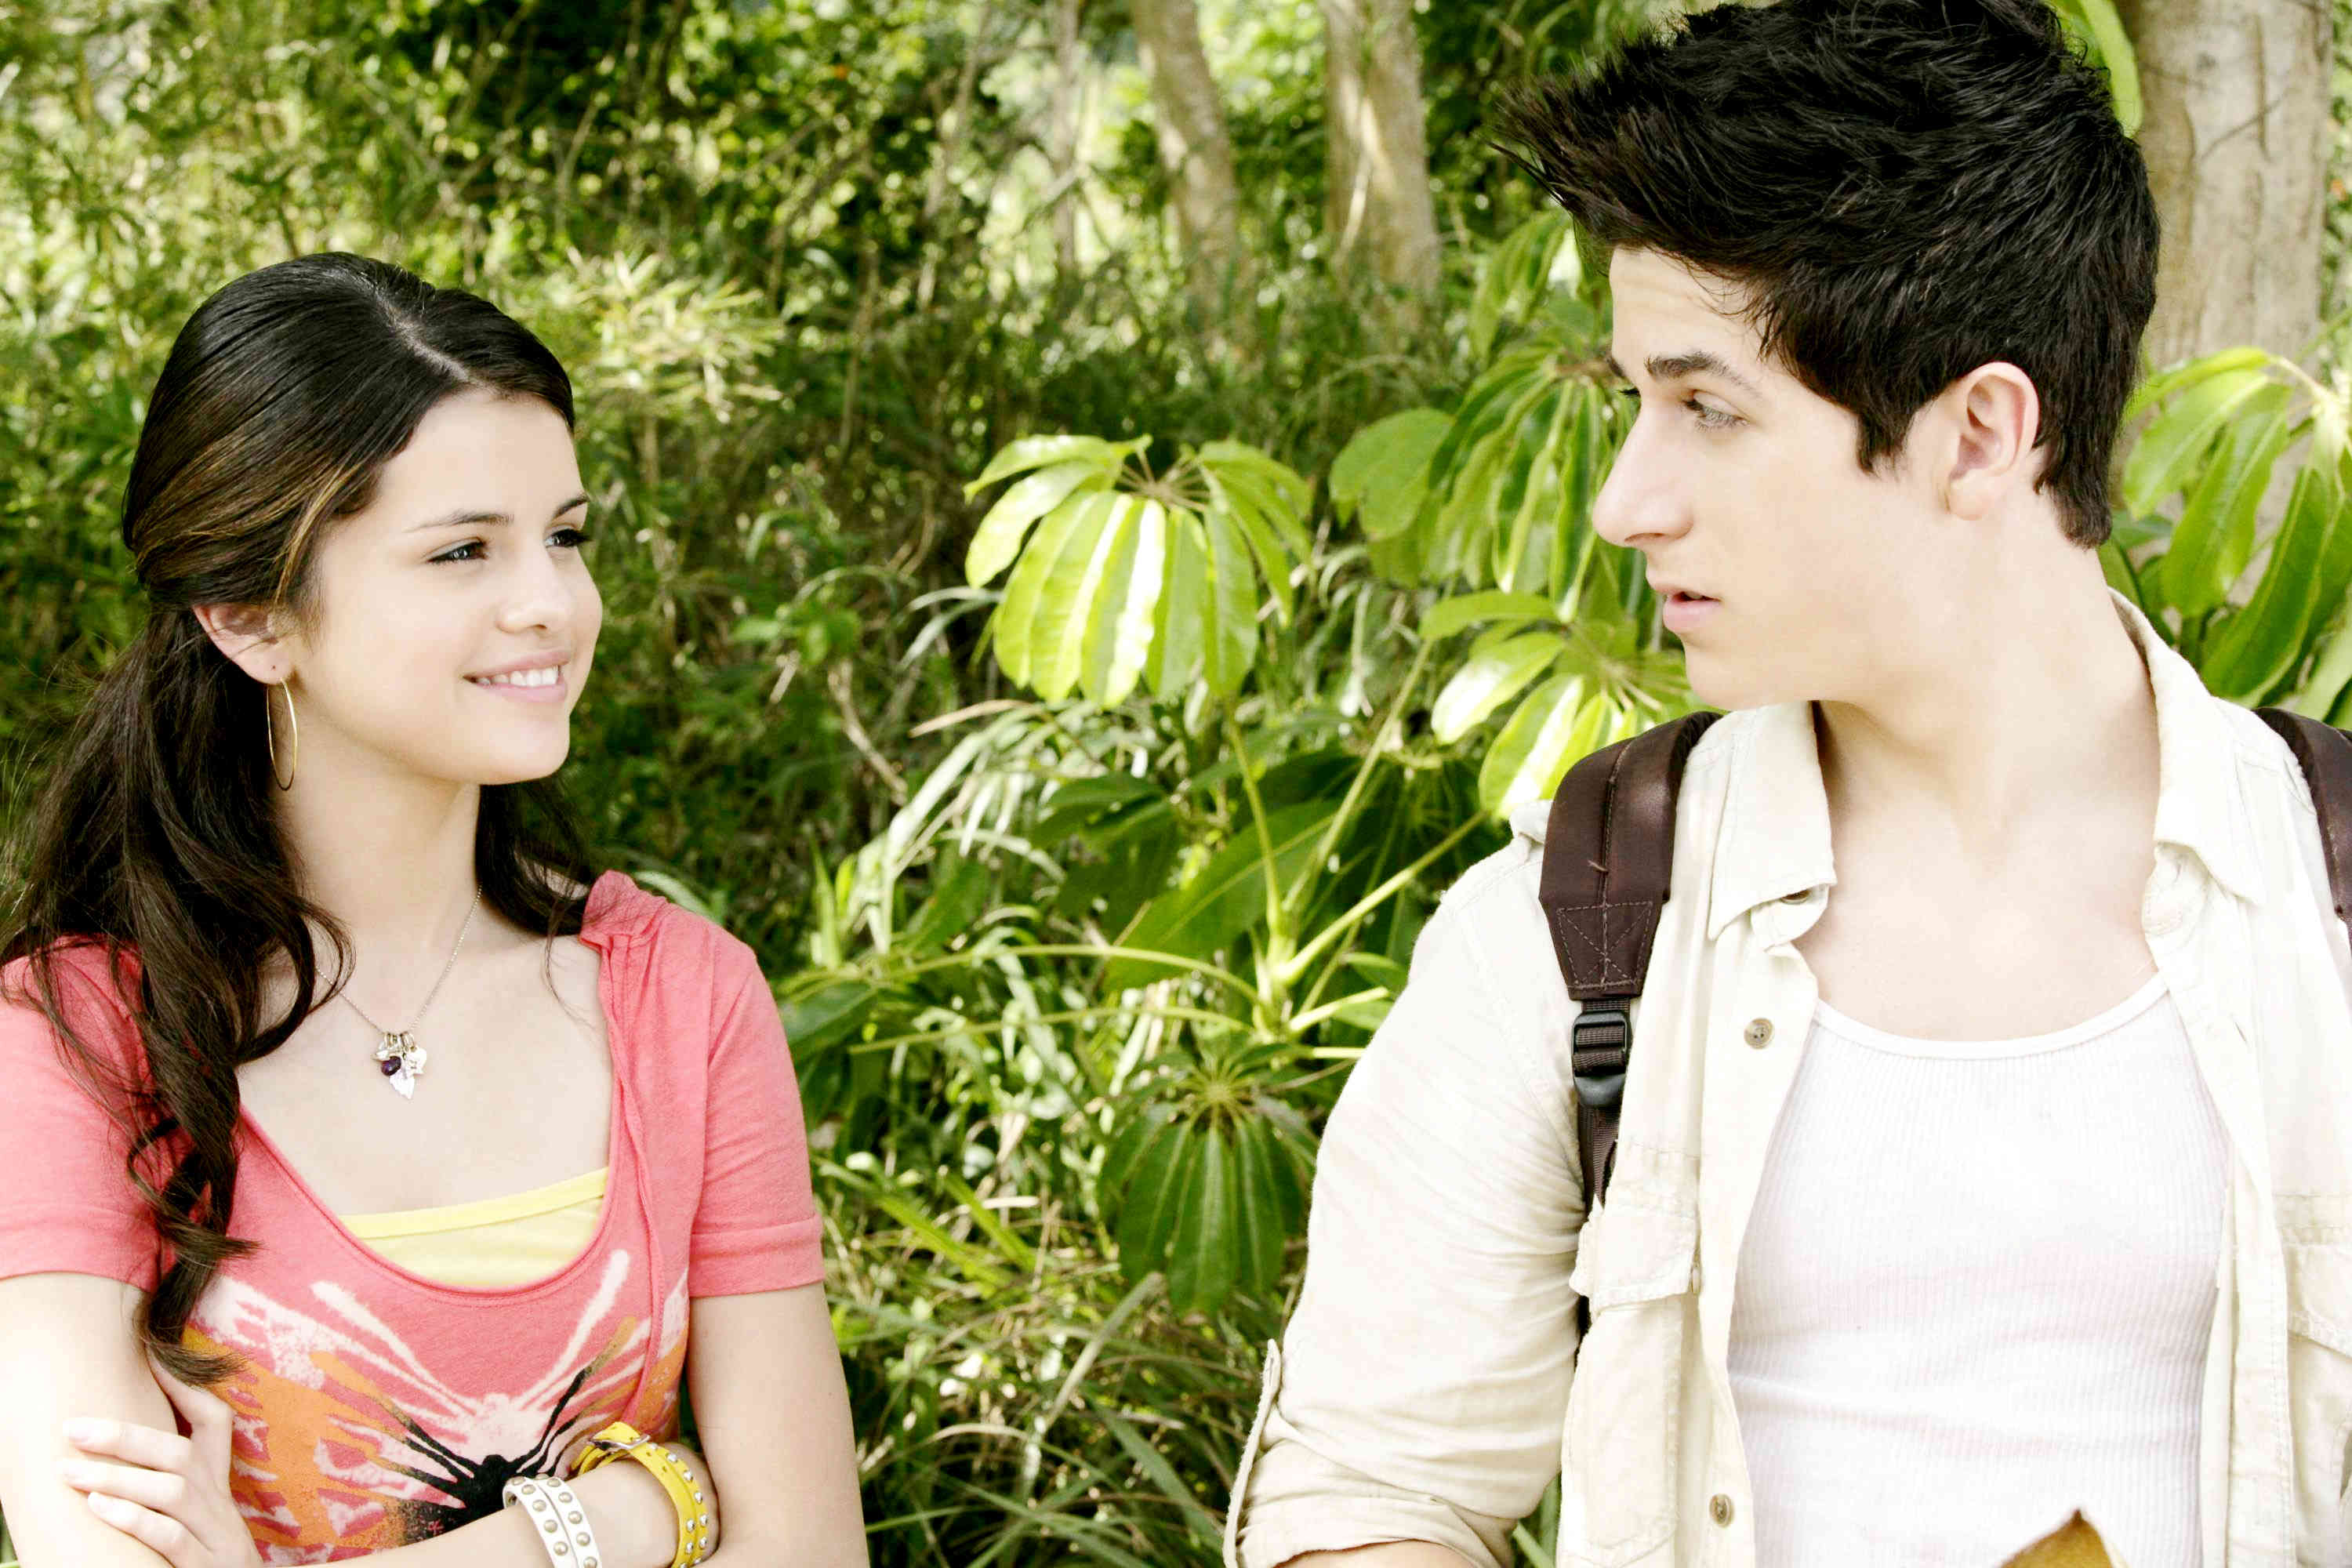 Selena Gomez stars as Alex Russo and David Henrie stars as Justin Russo in Disney Channel's Wizards of Waverly Place: The Movie (2009)